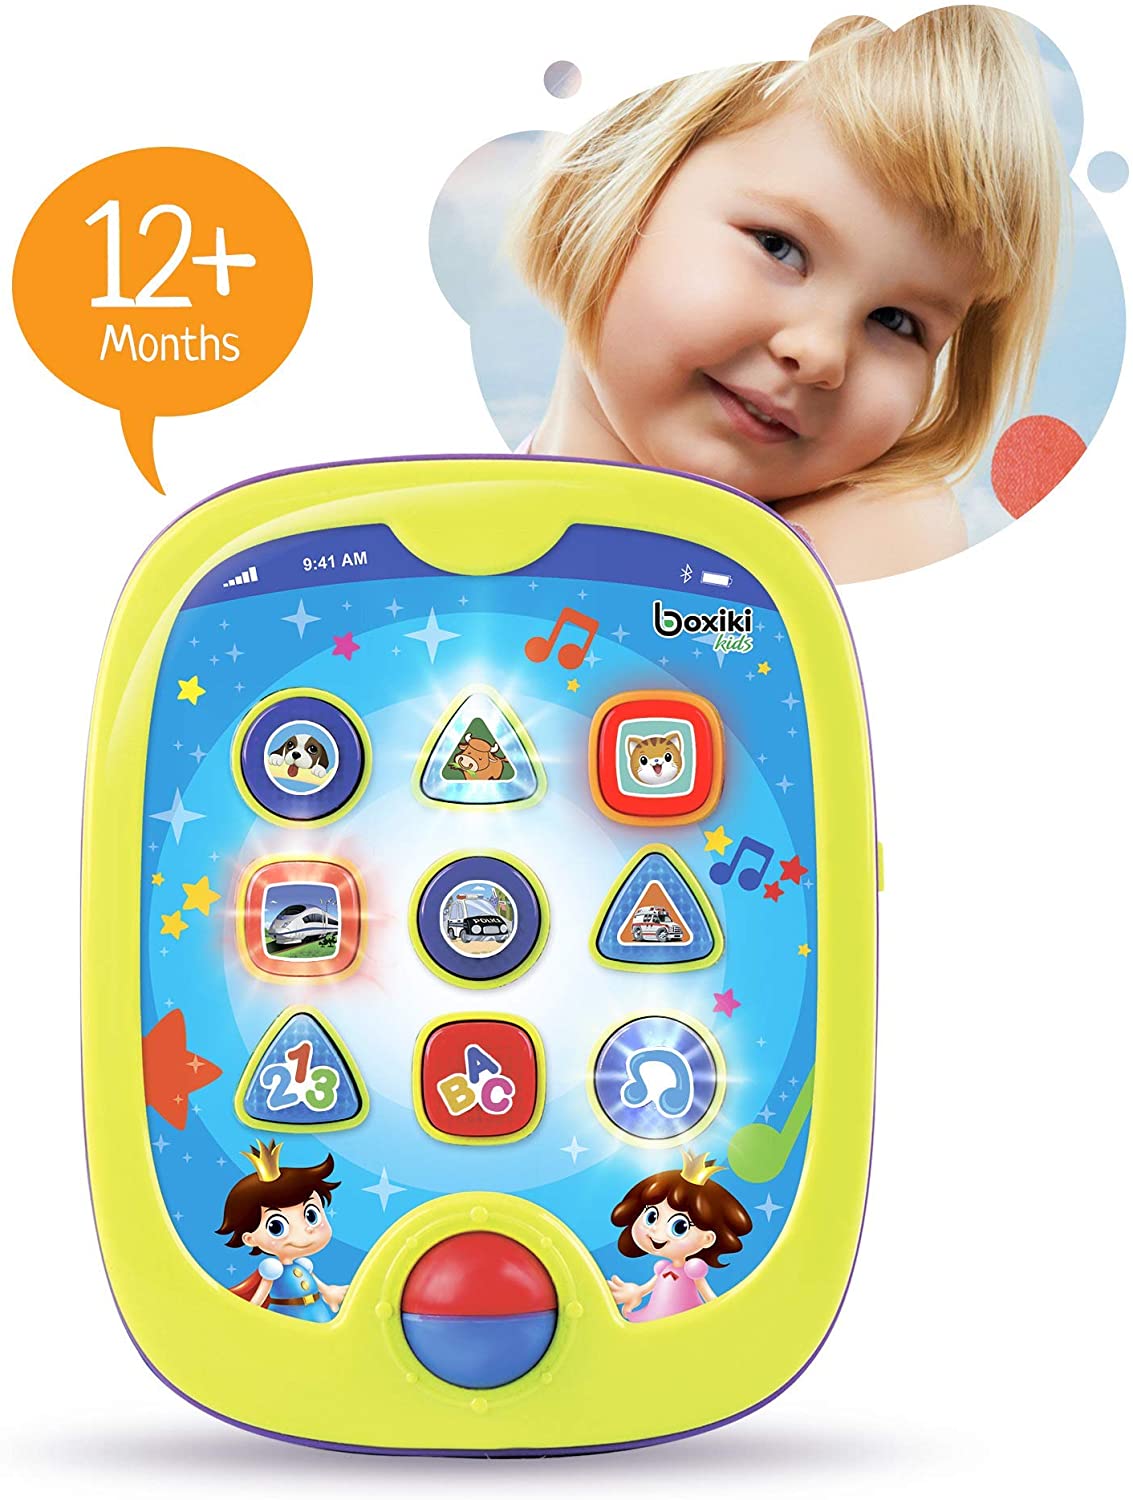  Preschool Toys/Educational Tablet Toy to Learn